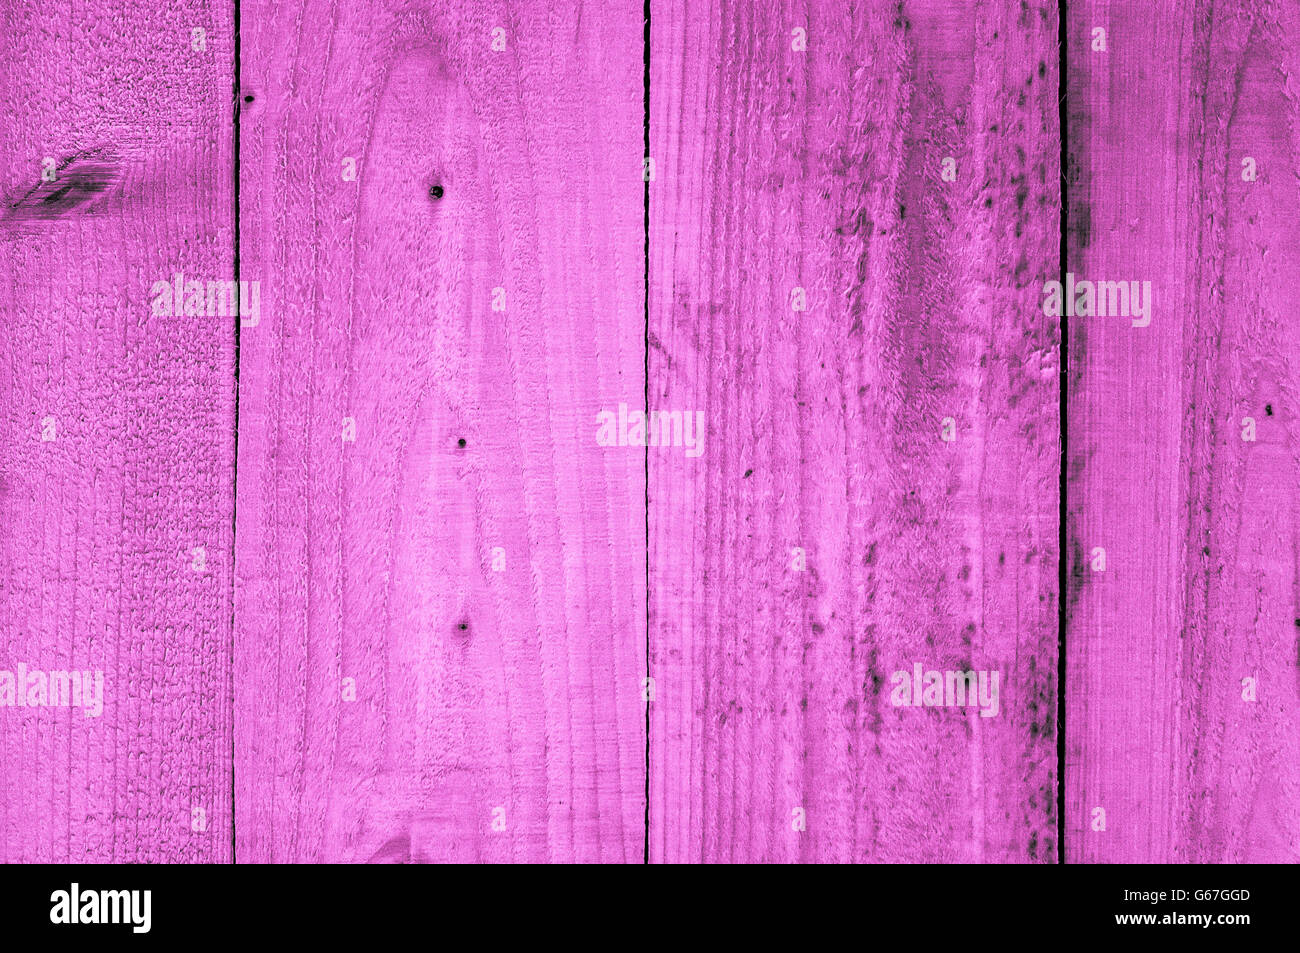 Excellent  style wood timber background of rough construction materials, technical materials in gray and purple Stock Photo